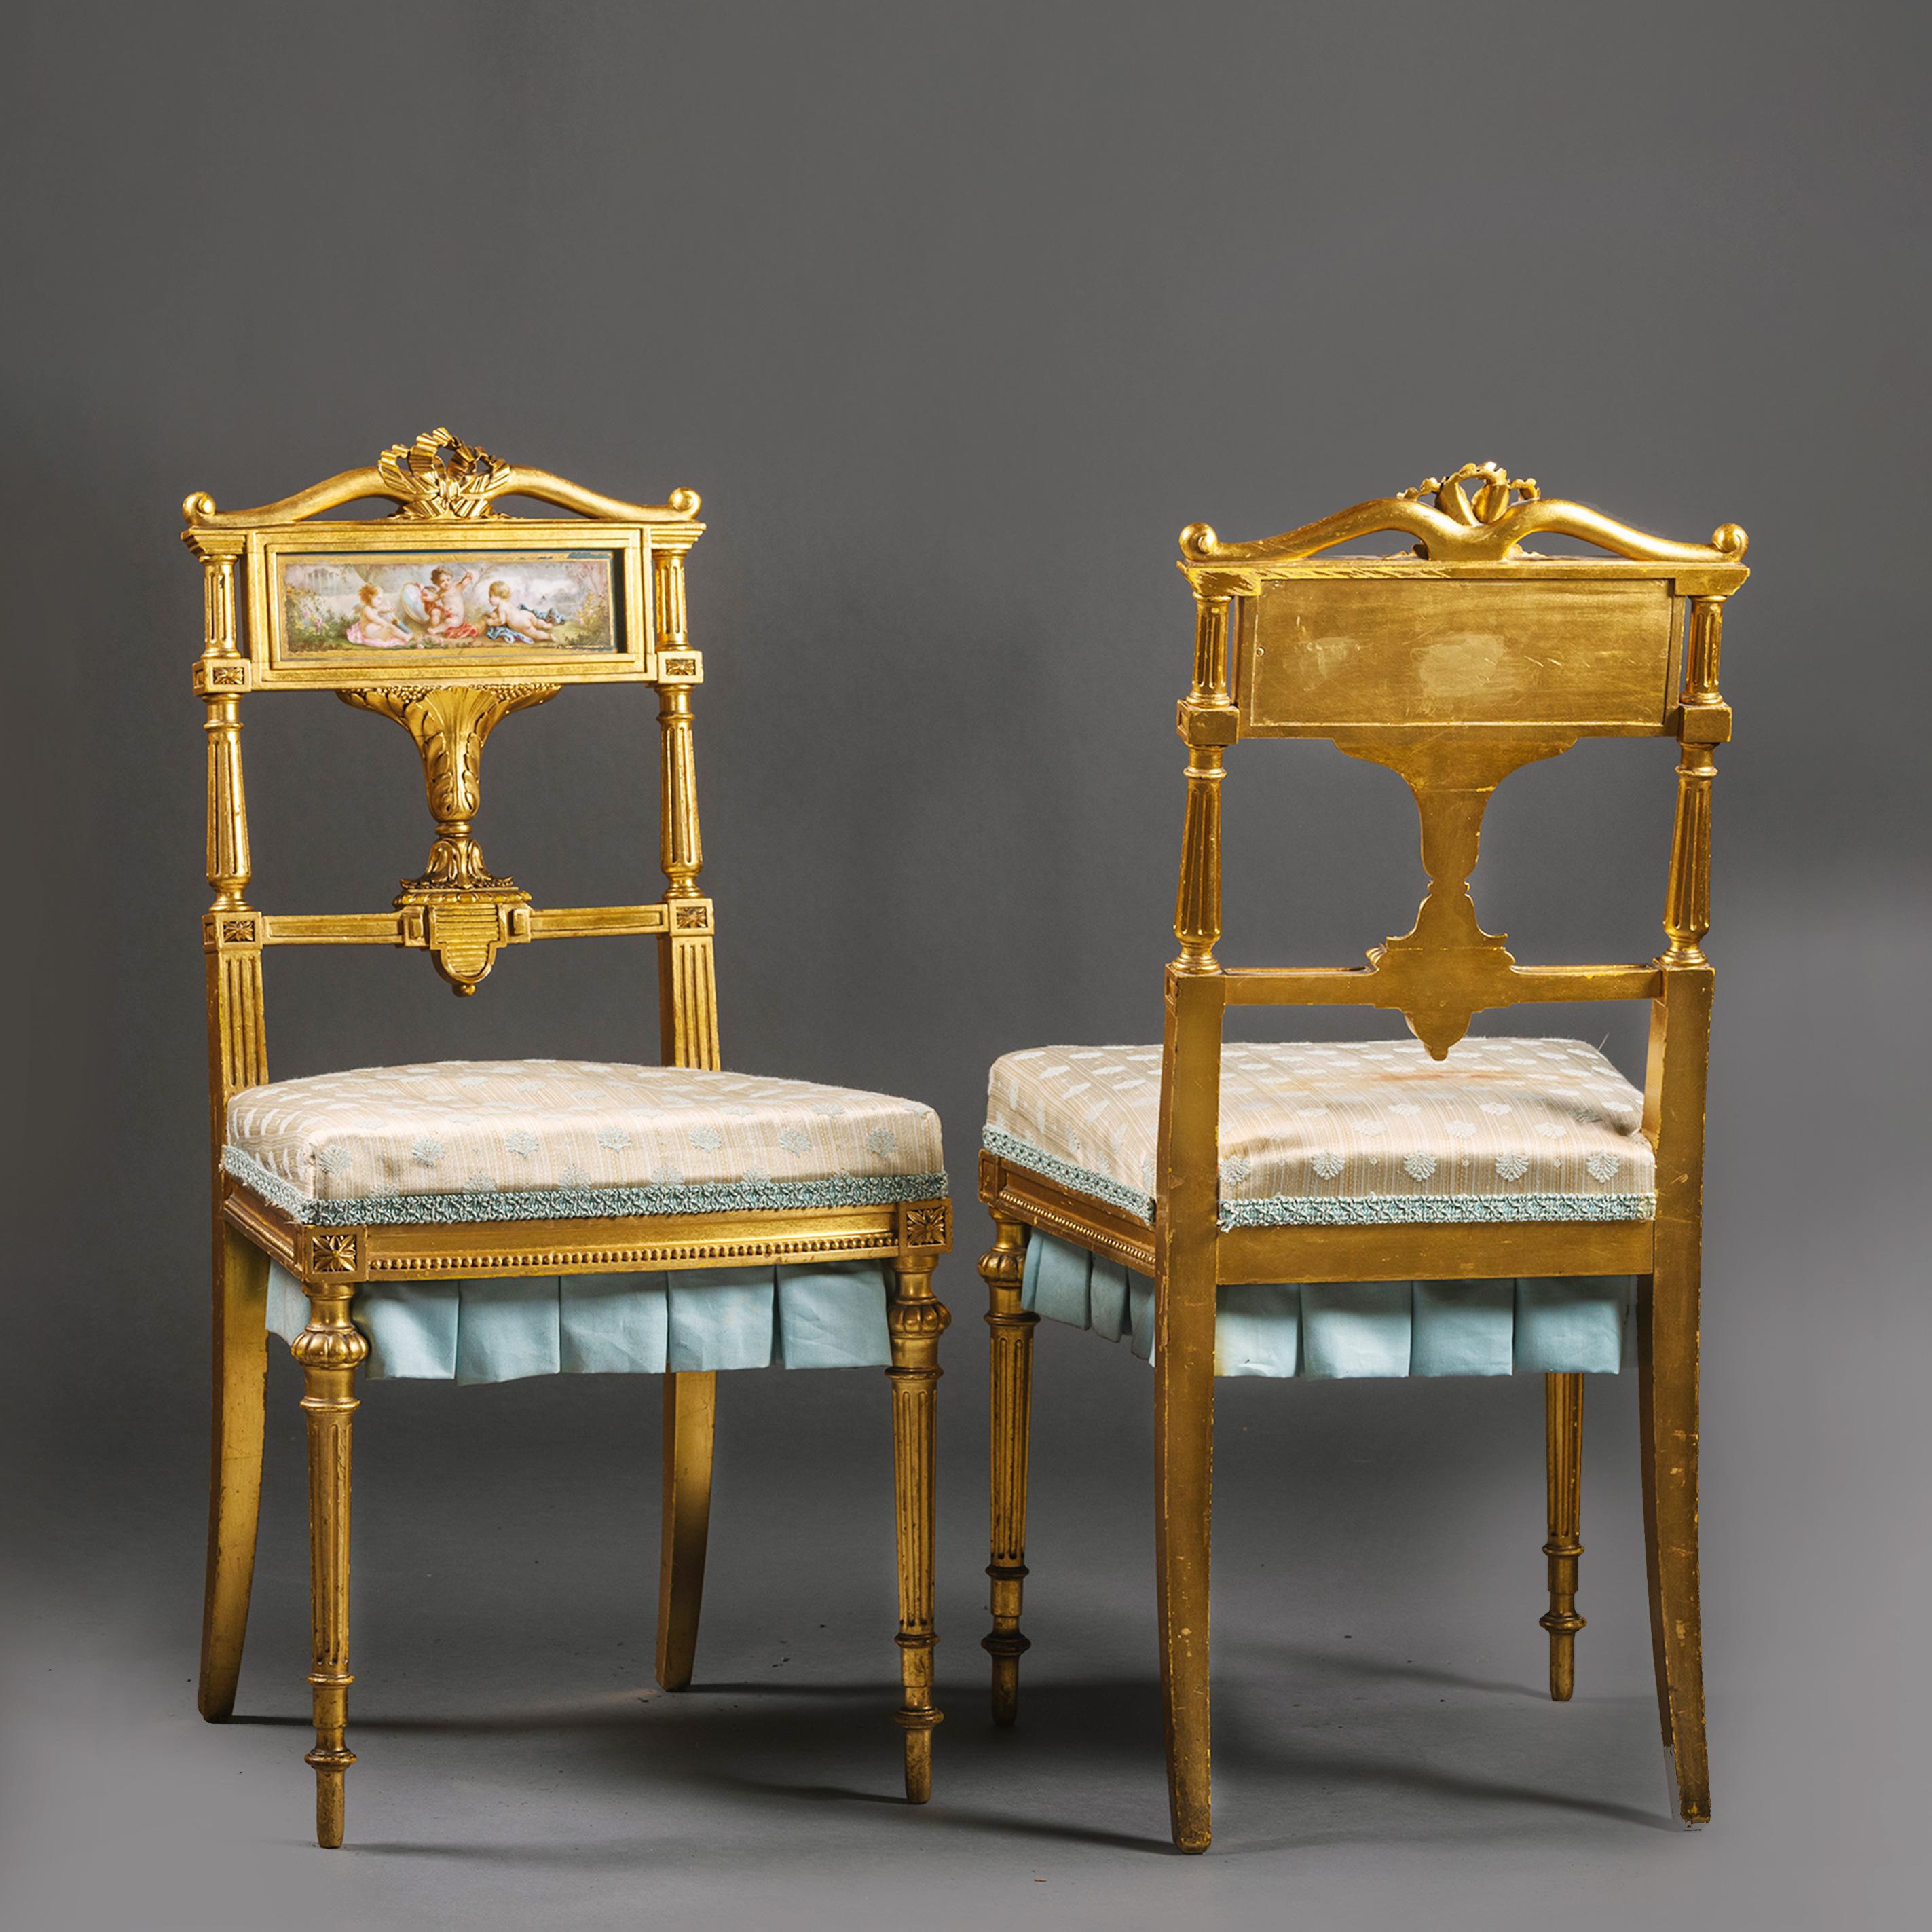 19th Century Pair of Louis XVI Style Giltwood and Sèvres-Style Porcelain Mounted Salon Chairs For Sale